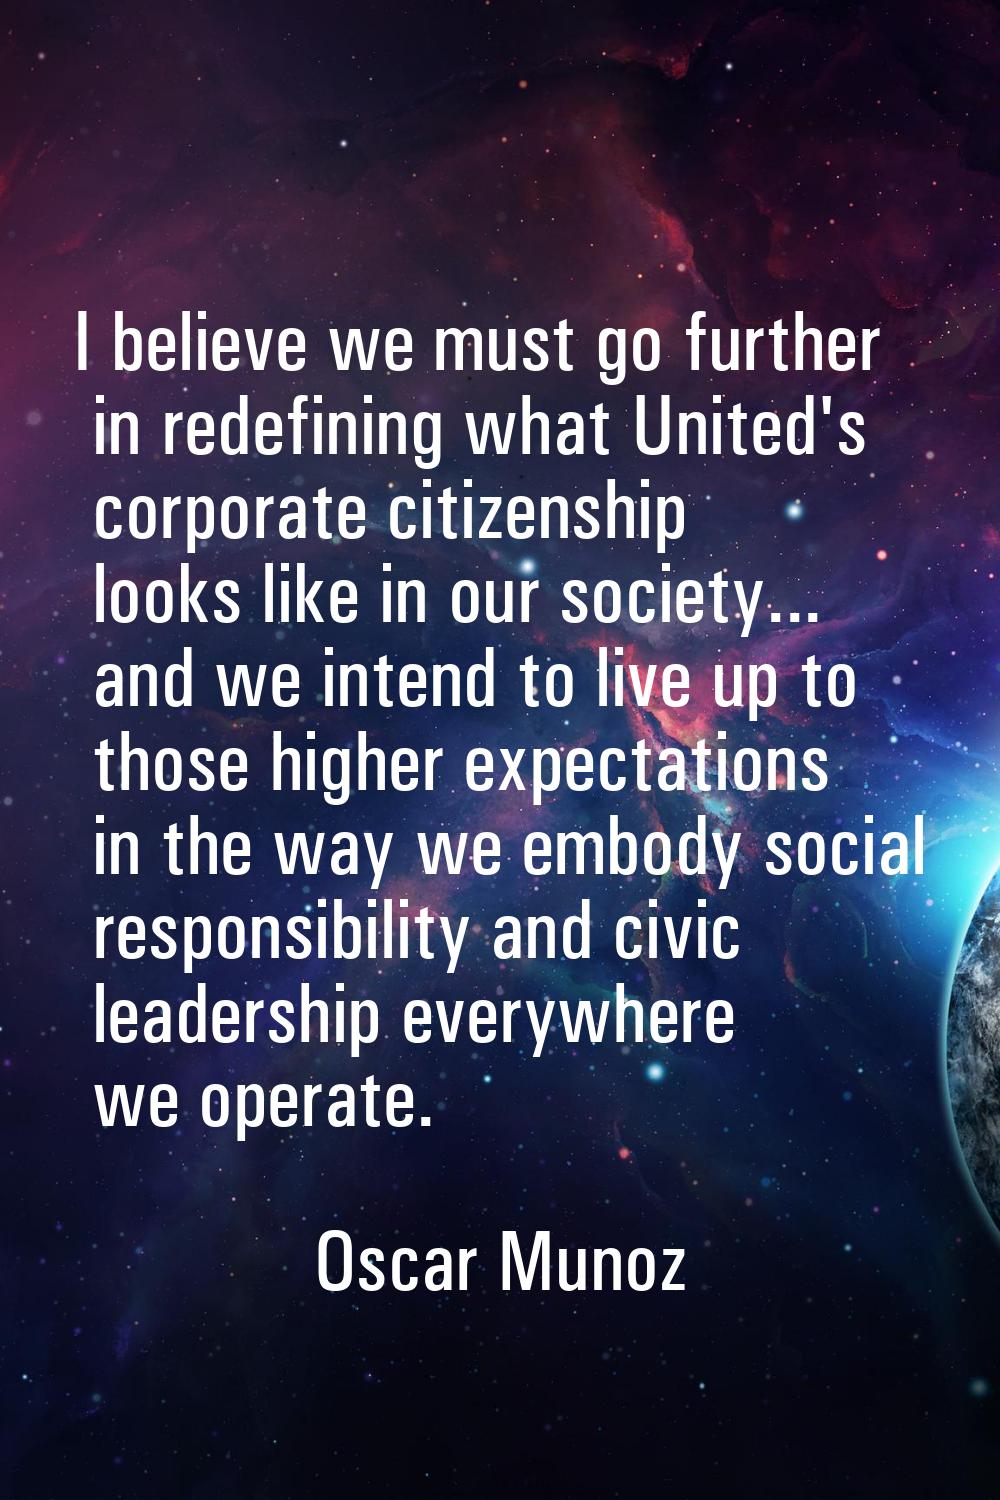 I believe we must go further in redefining what United's corporate citizenship looks like in our so